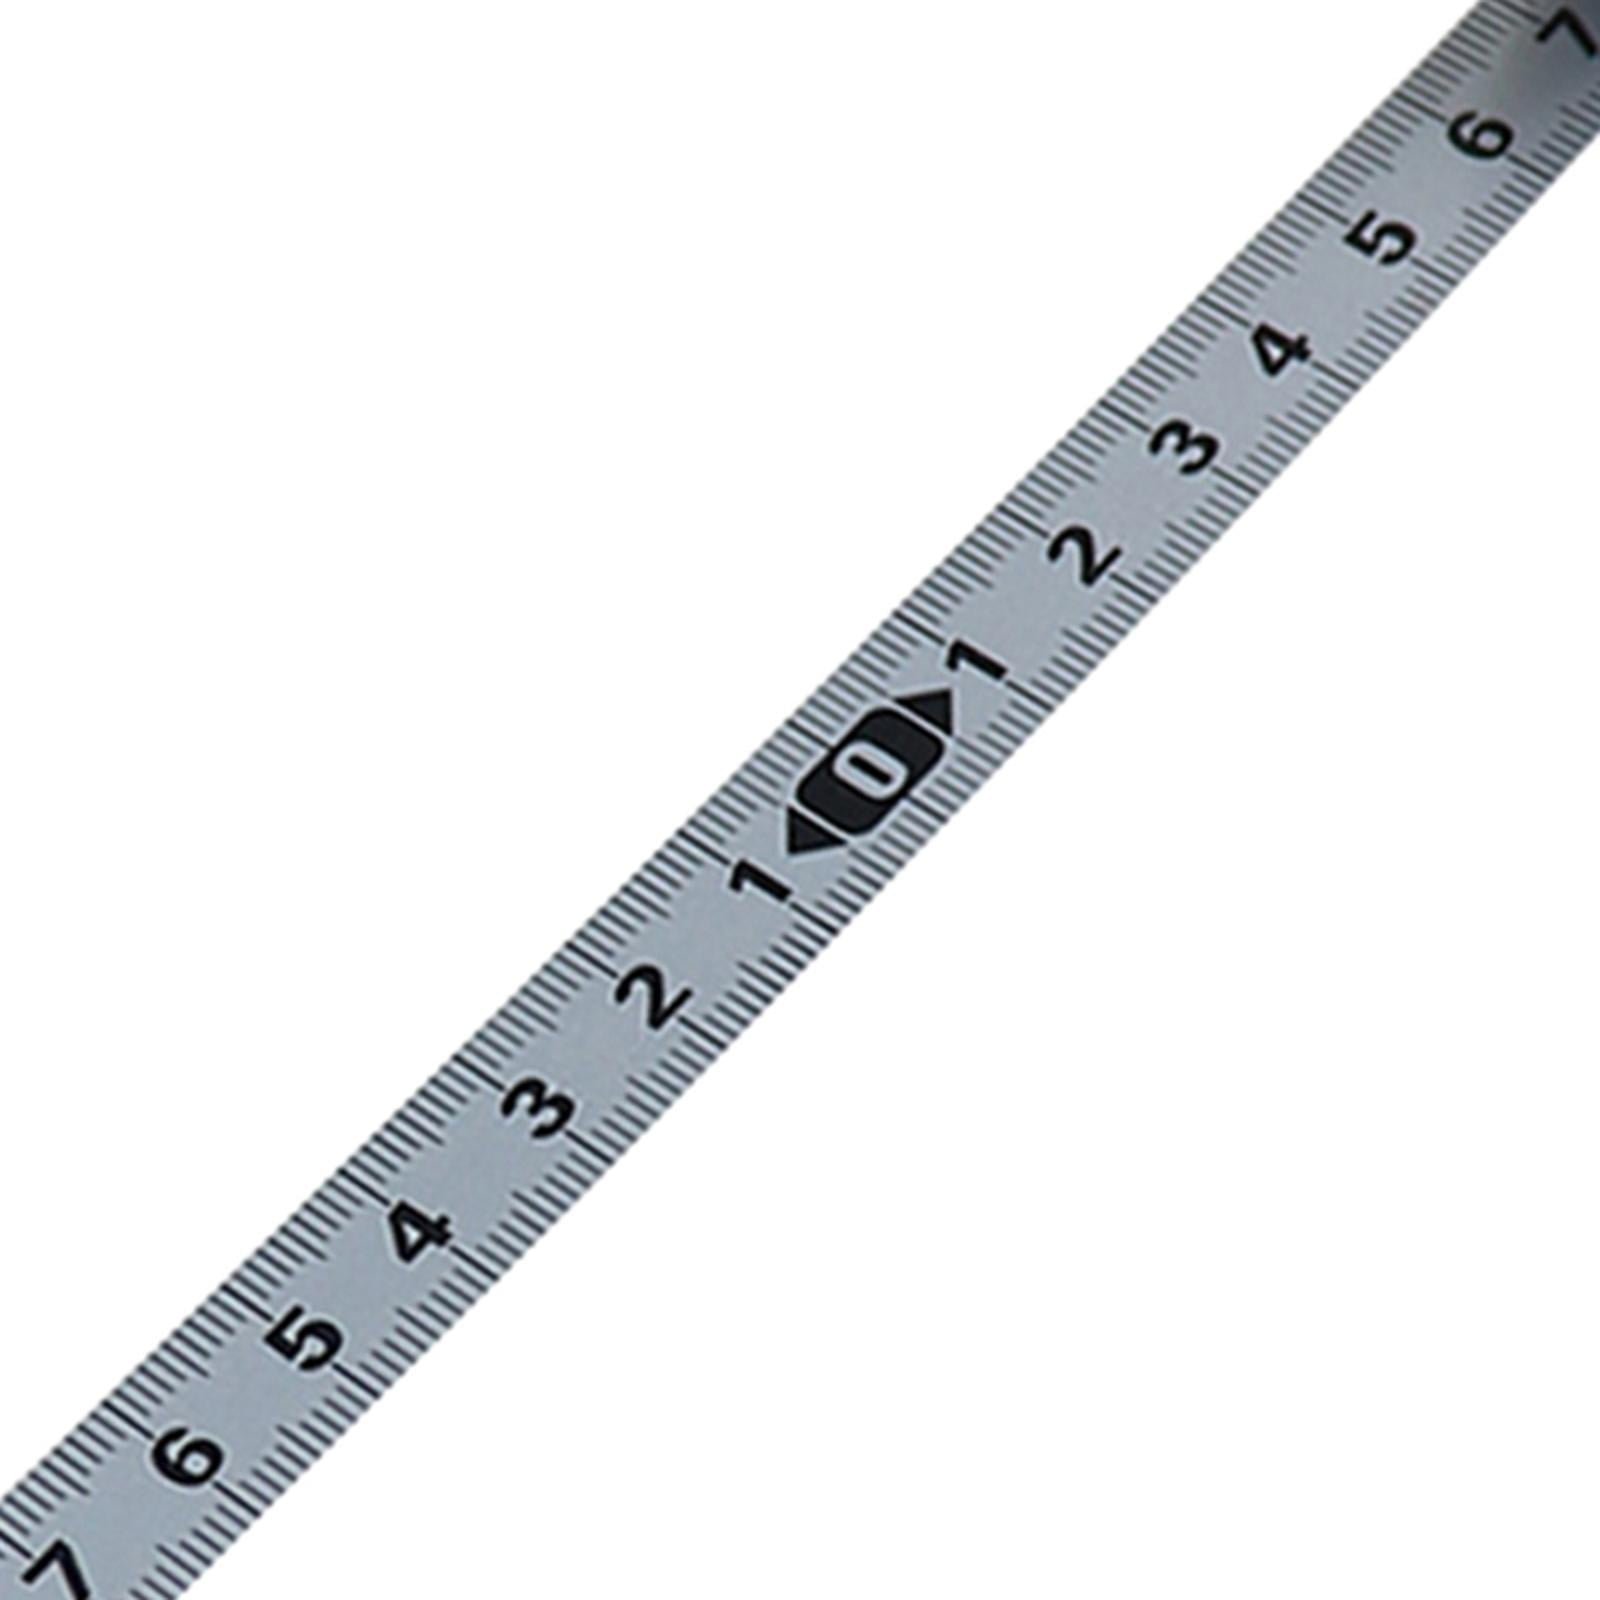 1/2/3/4/5 M Self-adhesive Measuring Tape Steel Workbench Ruler With Double  Scale Mm/inch Left Right Reading For Woodworking Saw - Tape Measures -  AliExpress